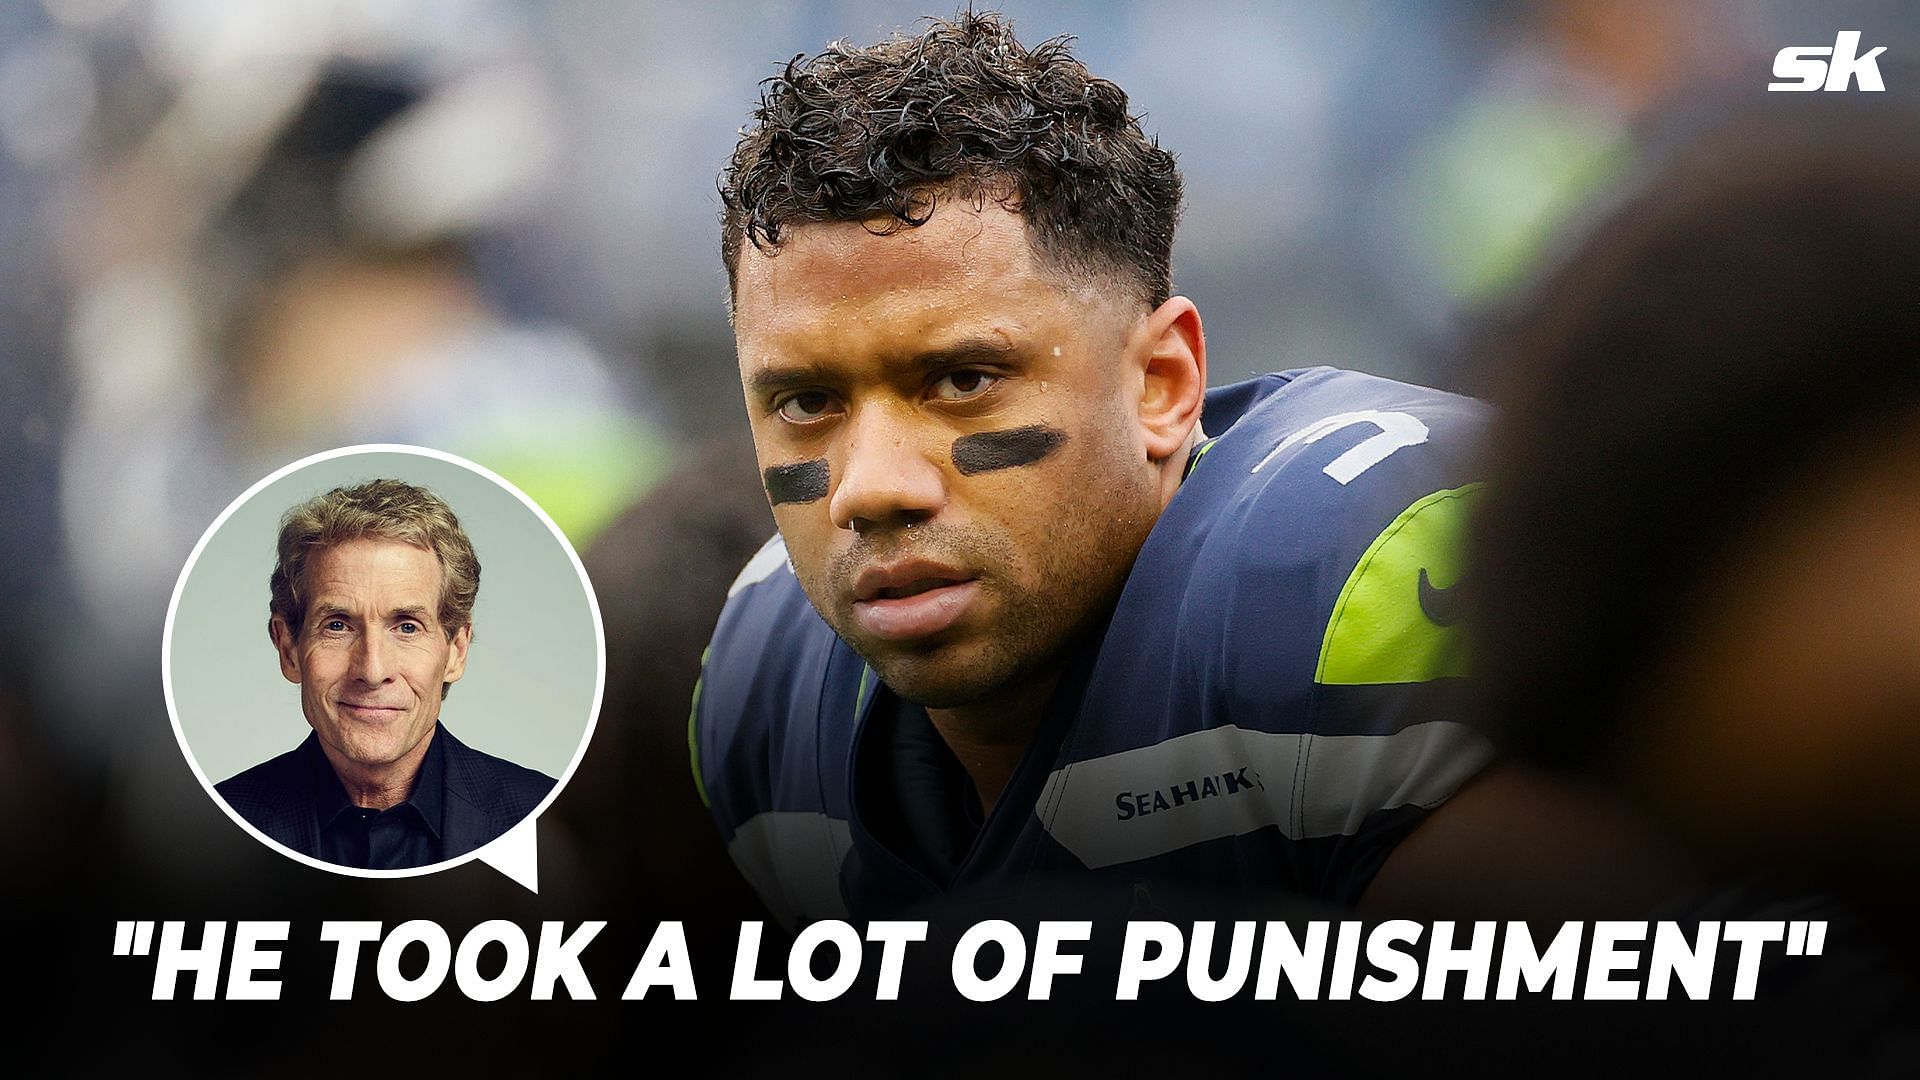 Russell Wilson is past his prime, says Skip Bayless